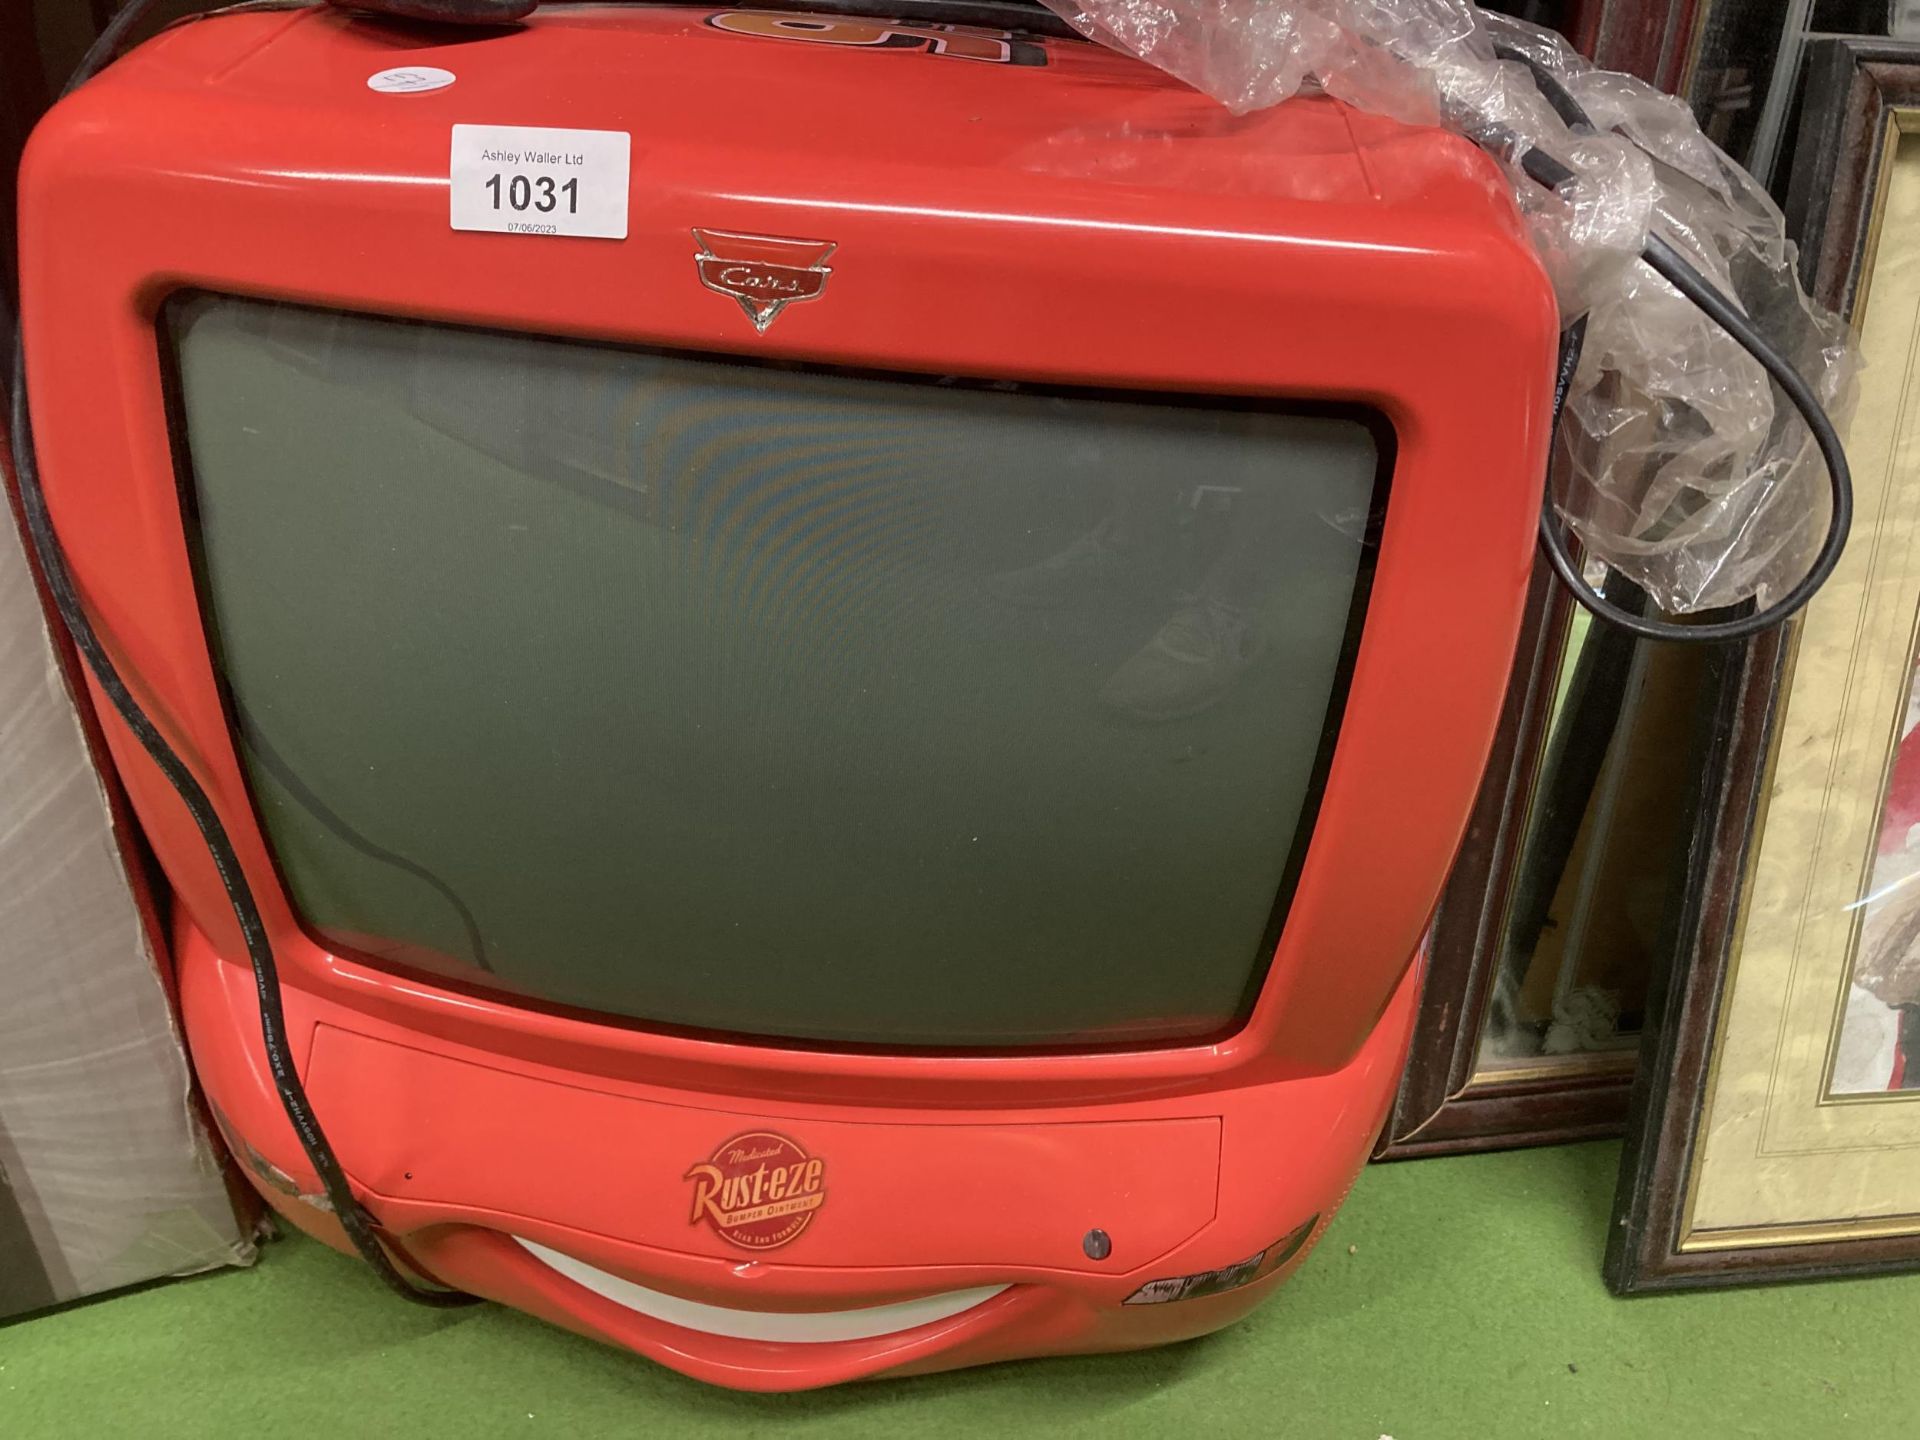 A 'CARS' MOVIE RED TV SET IN ORIGINAL BOX - Image 2 of 2